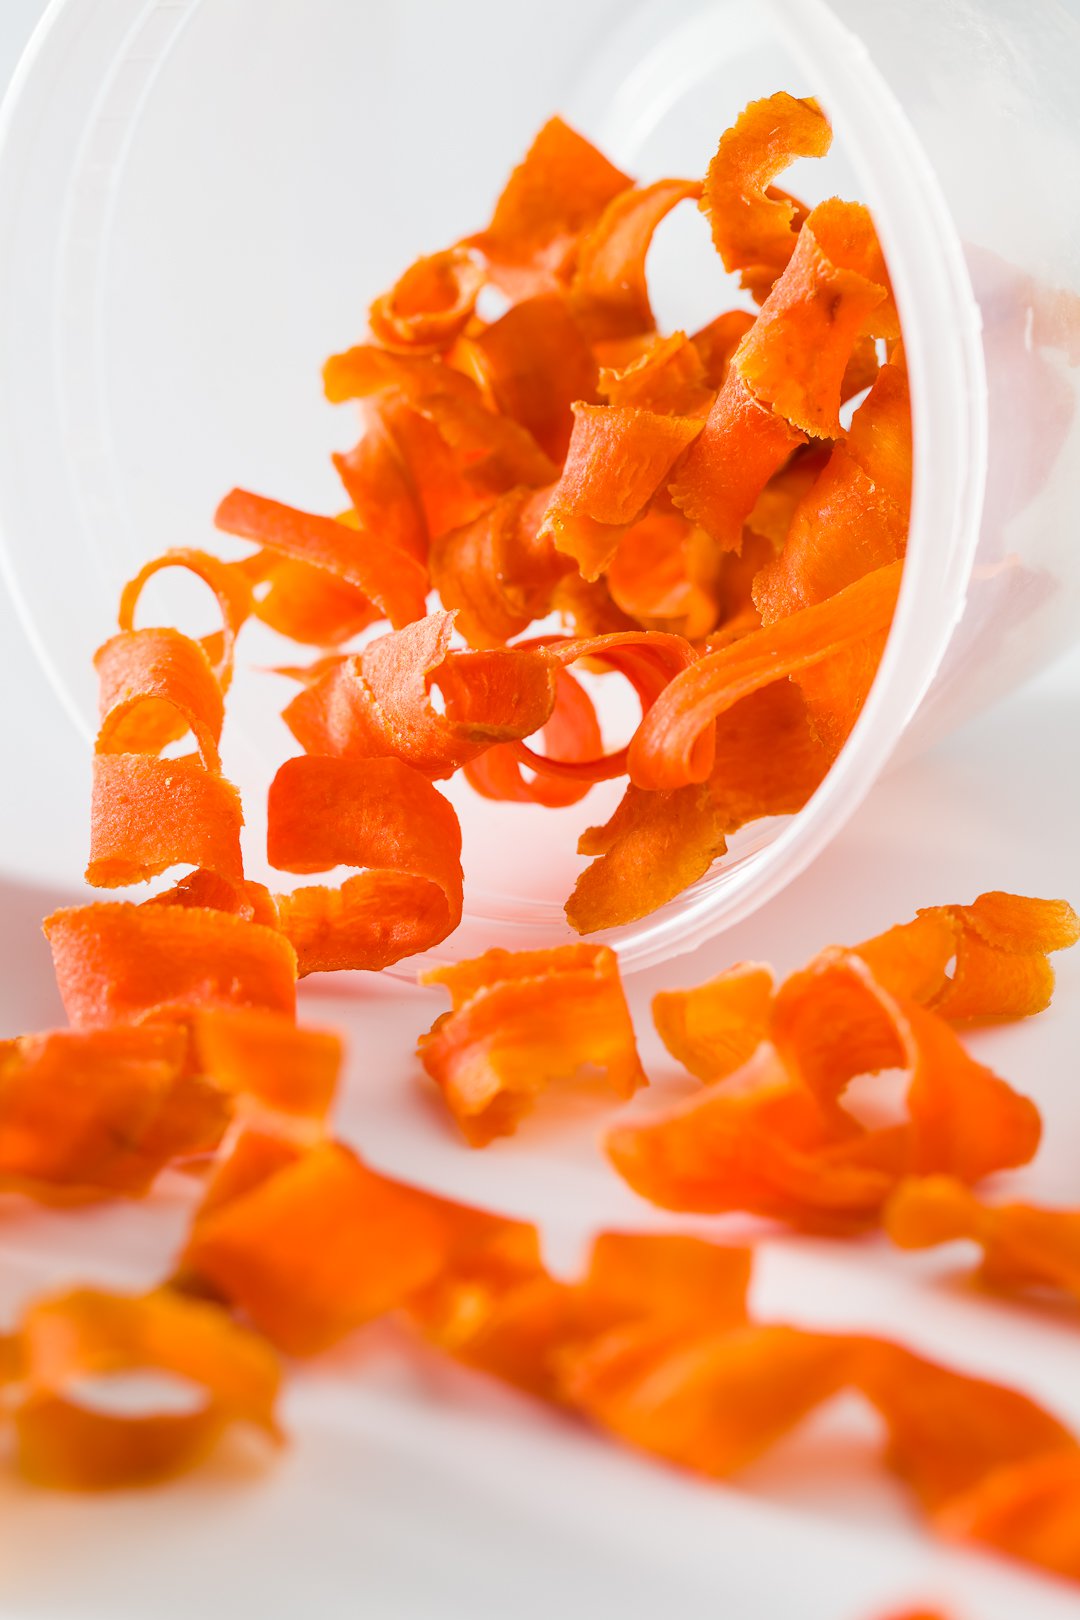 Candied carrot curls pouring out of a container